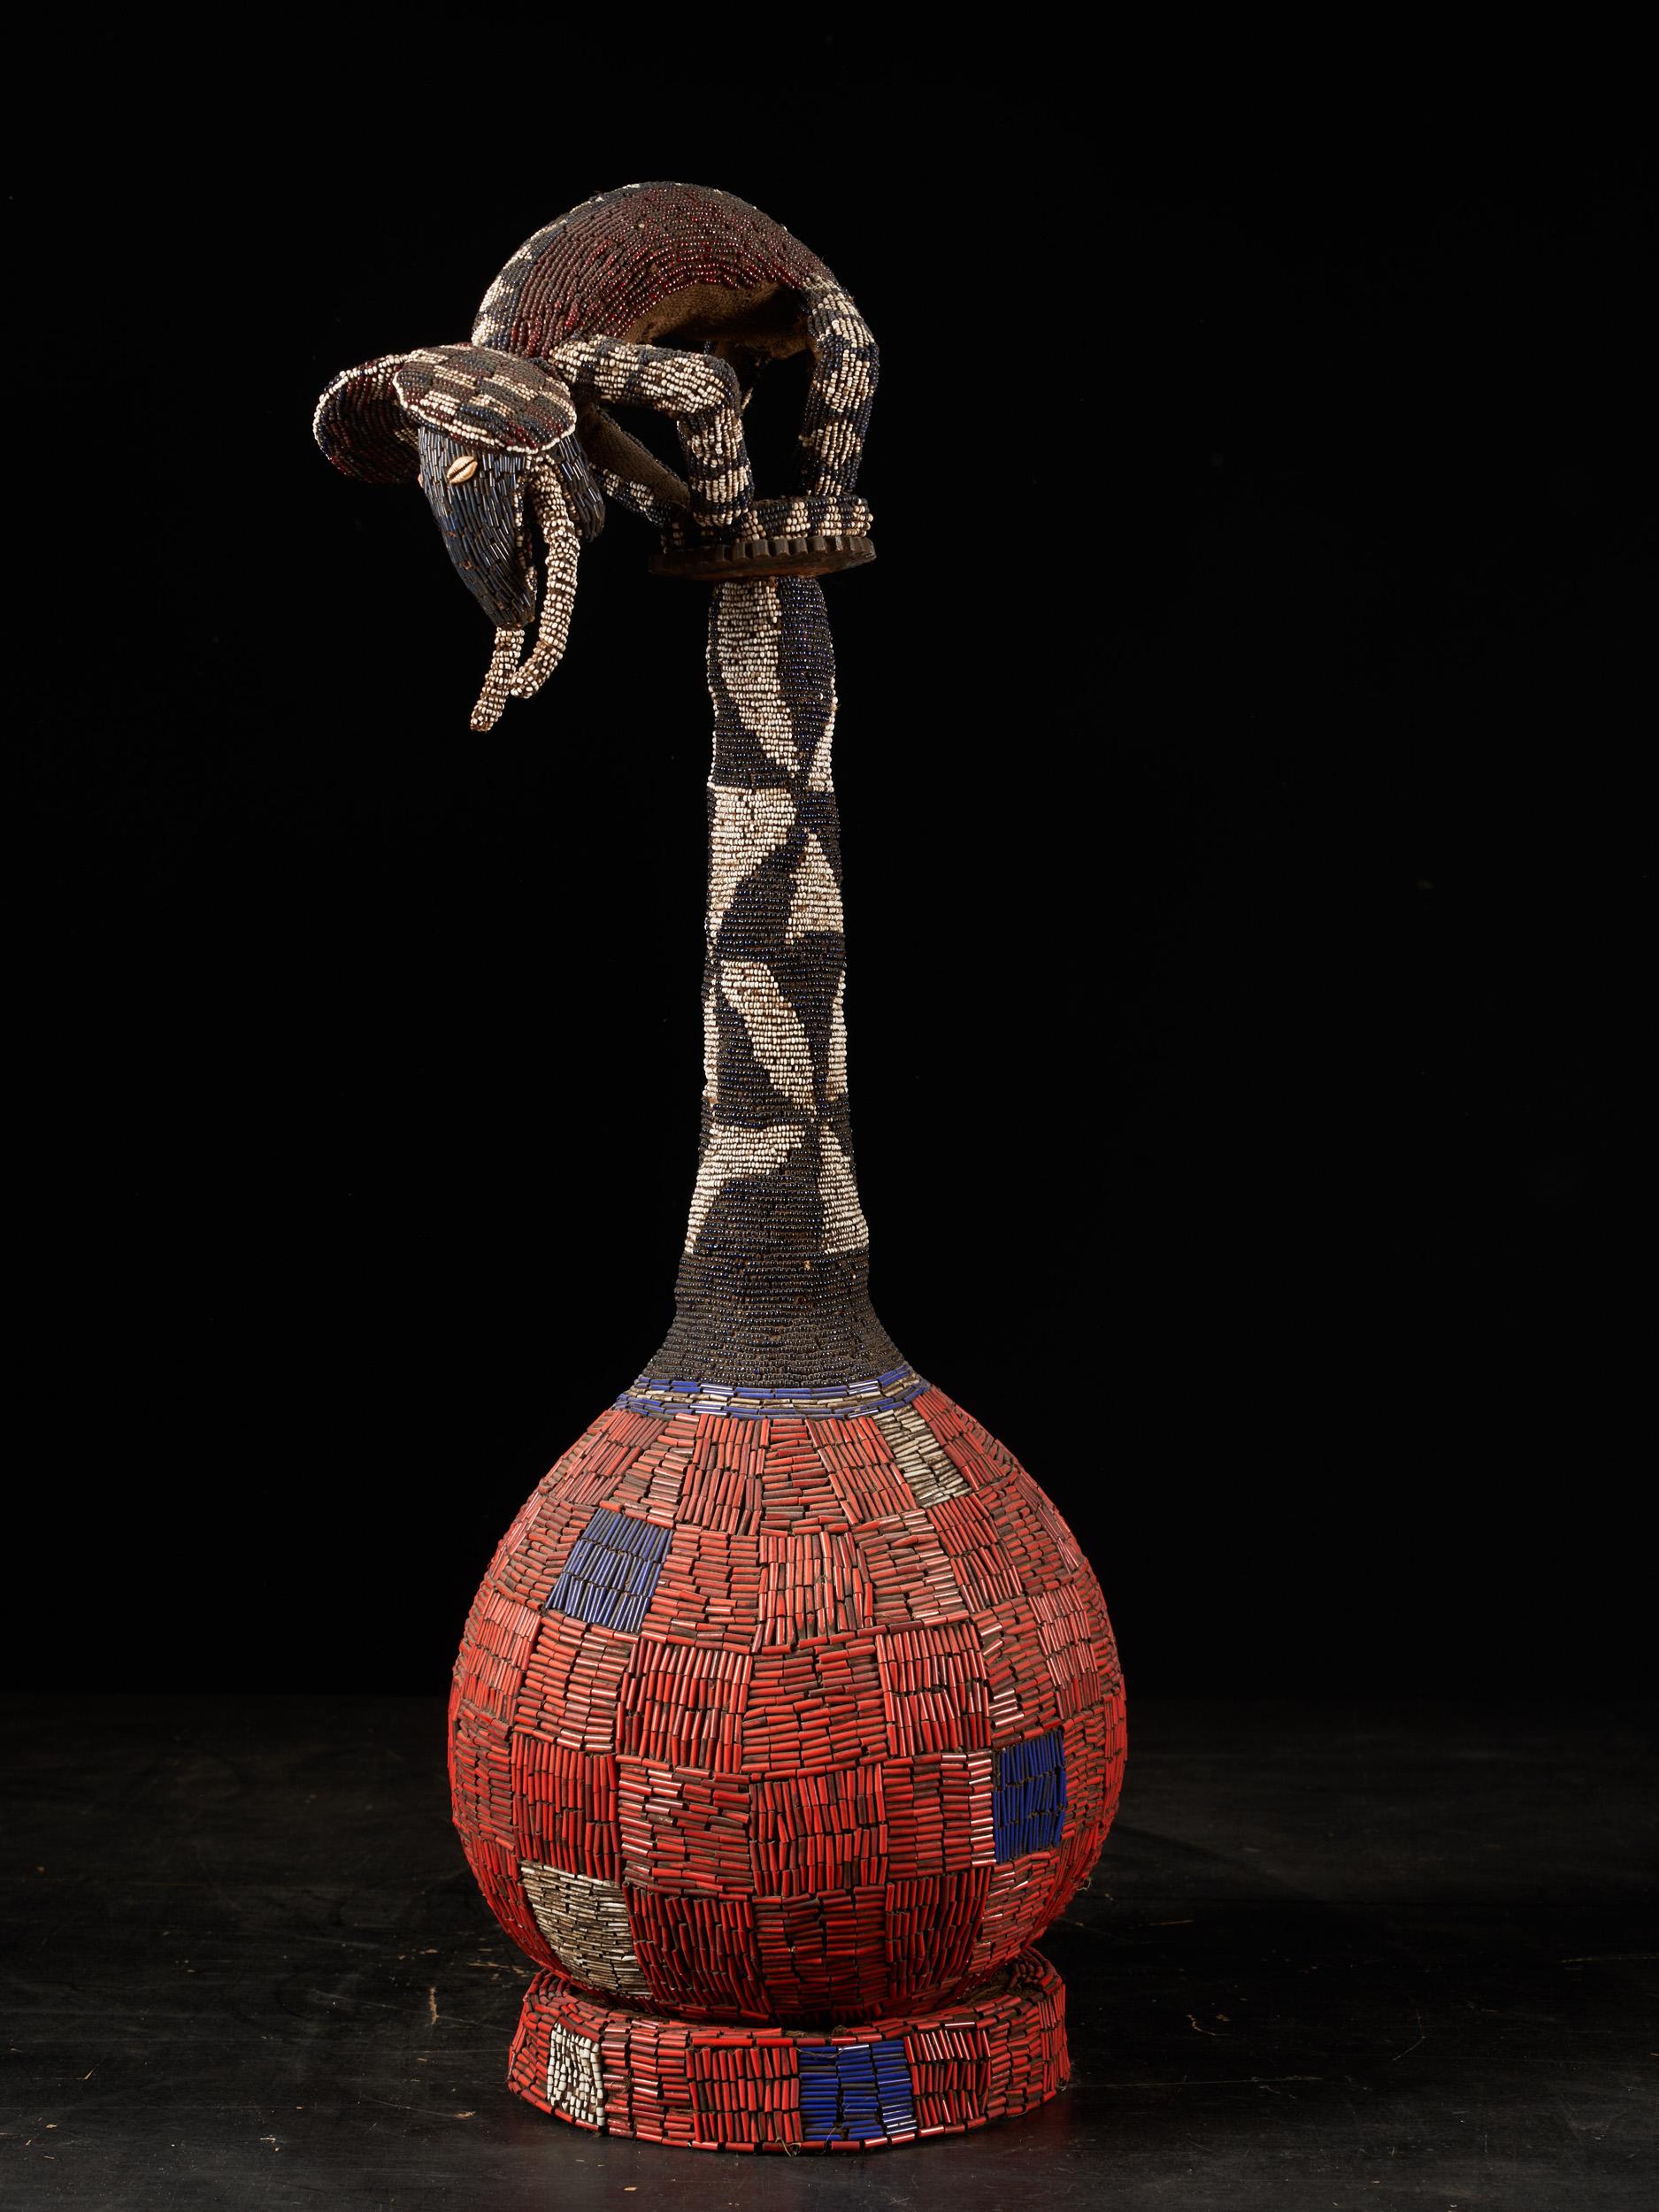 Cameroonian Ceremonial Palm Wine Vessel from the Cameroon Grasslands